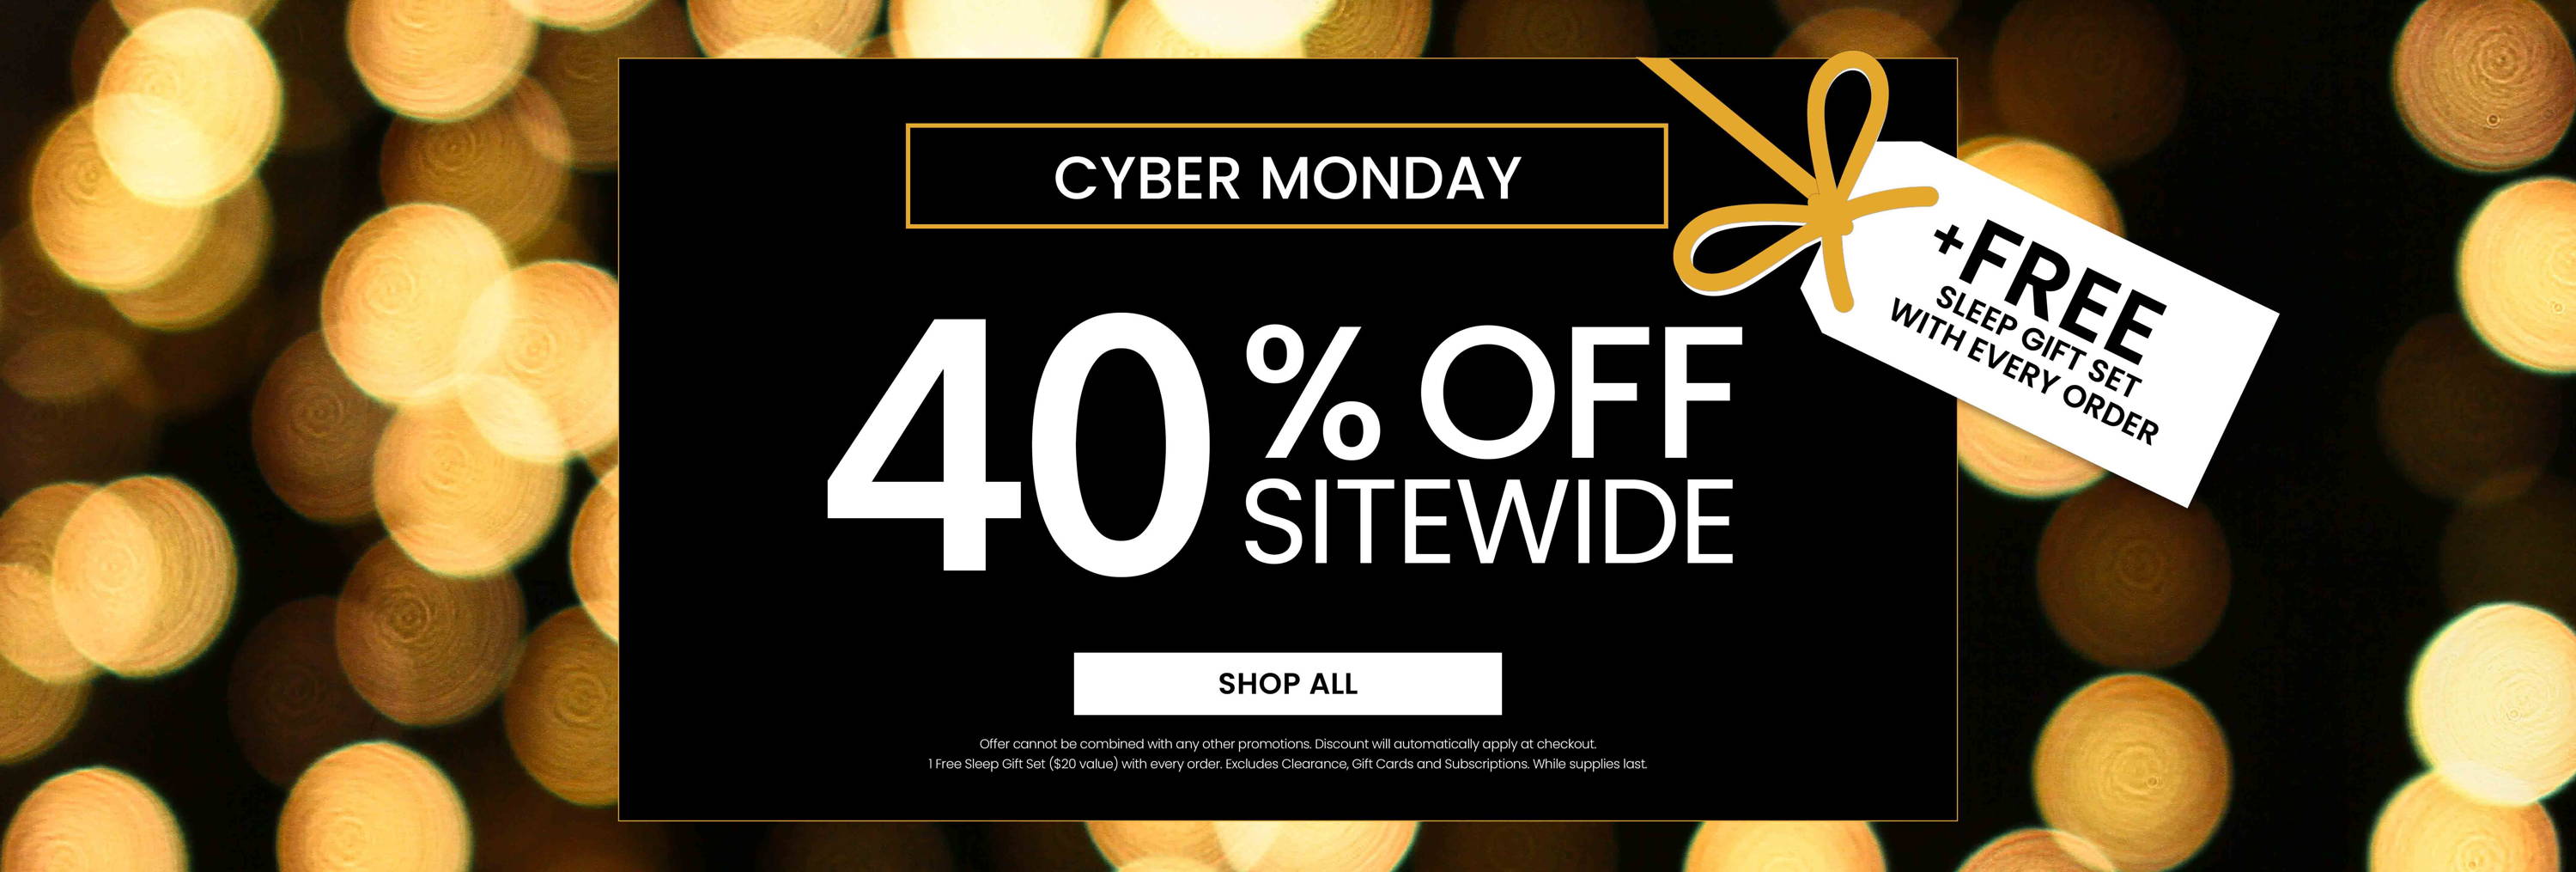 Cyber Monday. 40% Off Sitewide. Plus, Free Sleep Gift Set with EVERY Order.